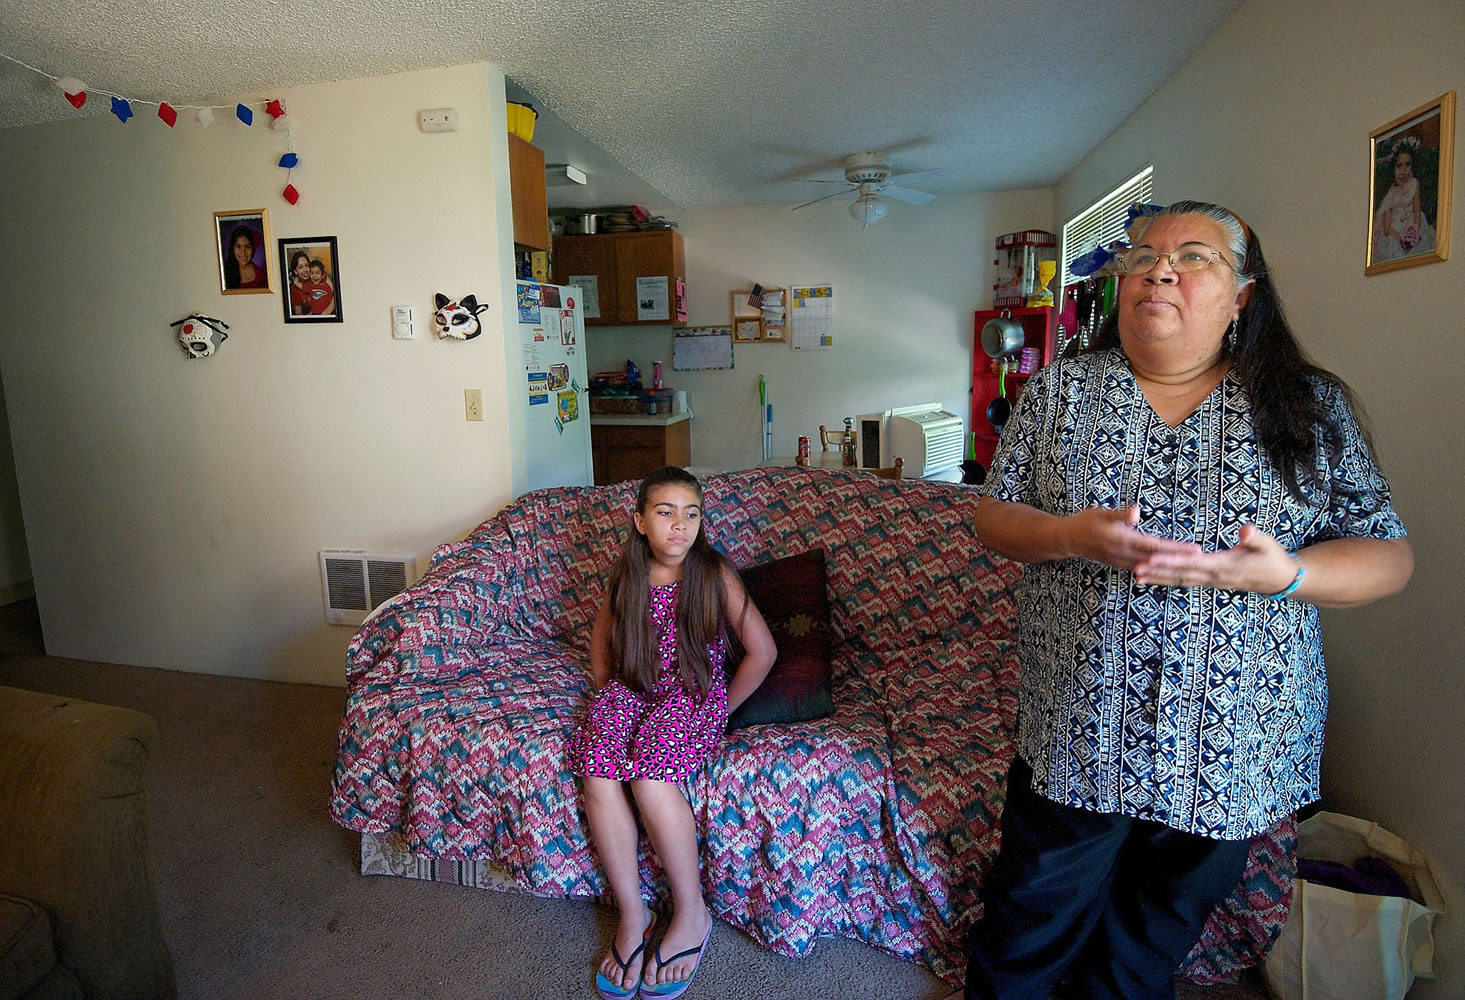 Irma Villarreal rents this Hazel Dell apartment without any housing subsidy but doubts she'll be able to afford that for long. She has been homeless before and worries about having to hit the streets again, especially because she has custody of her 11-year-old granddaughter, Leila.